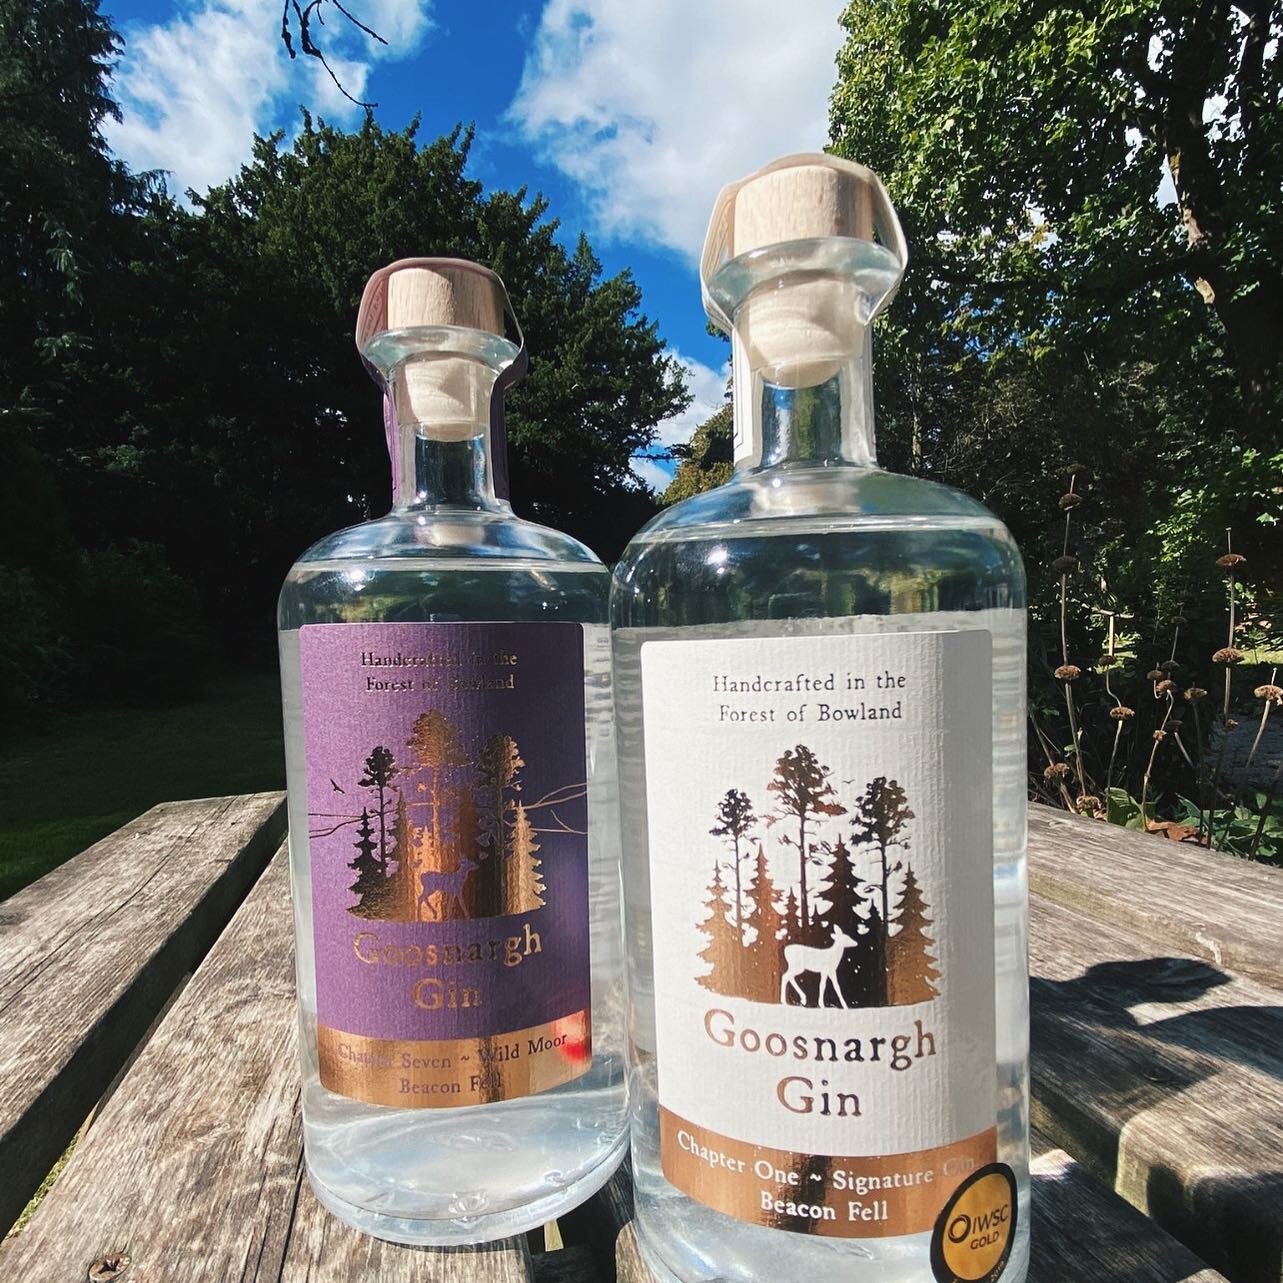 ʀᴏʏᴀʟ ʙᴀɴᴋ ʜᴏʟɪᴅᴀʏ ᴄᴇʟᴇʙʀᴀᴛɪᴏɴs. 

Continuing the celebrations with a delicious G&amp;T in our gardens, with @goosnarghgin of course! Pop along and enjoy a refreshing drink in our gardens and make the most of the long weekend.

Don&rsquo;t forget to 